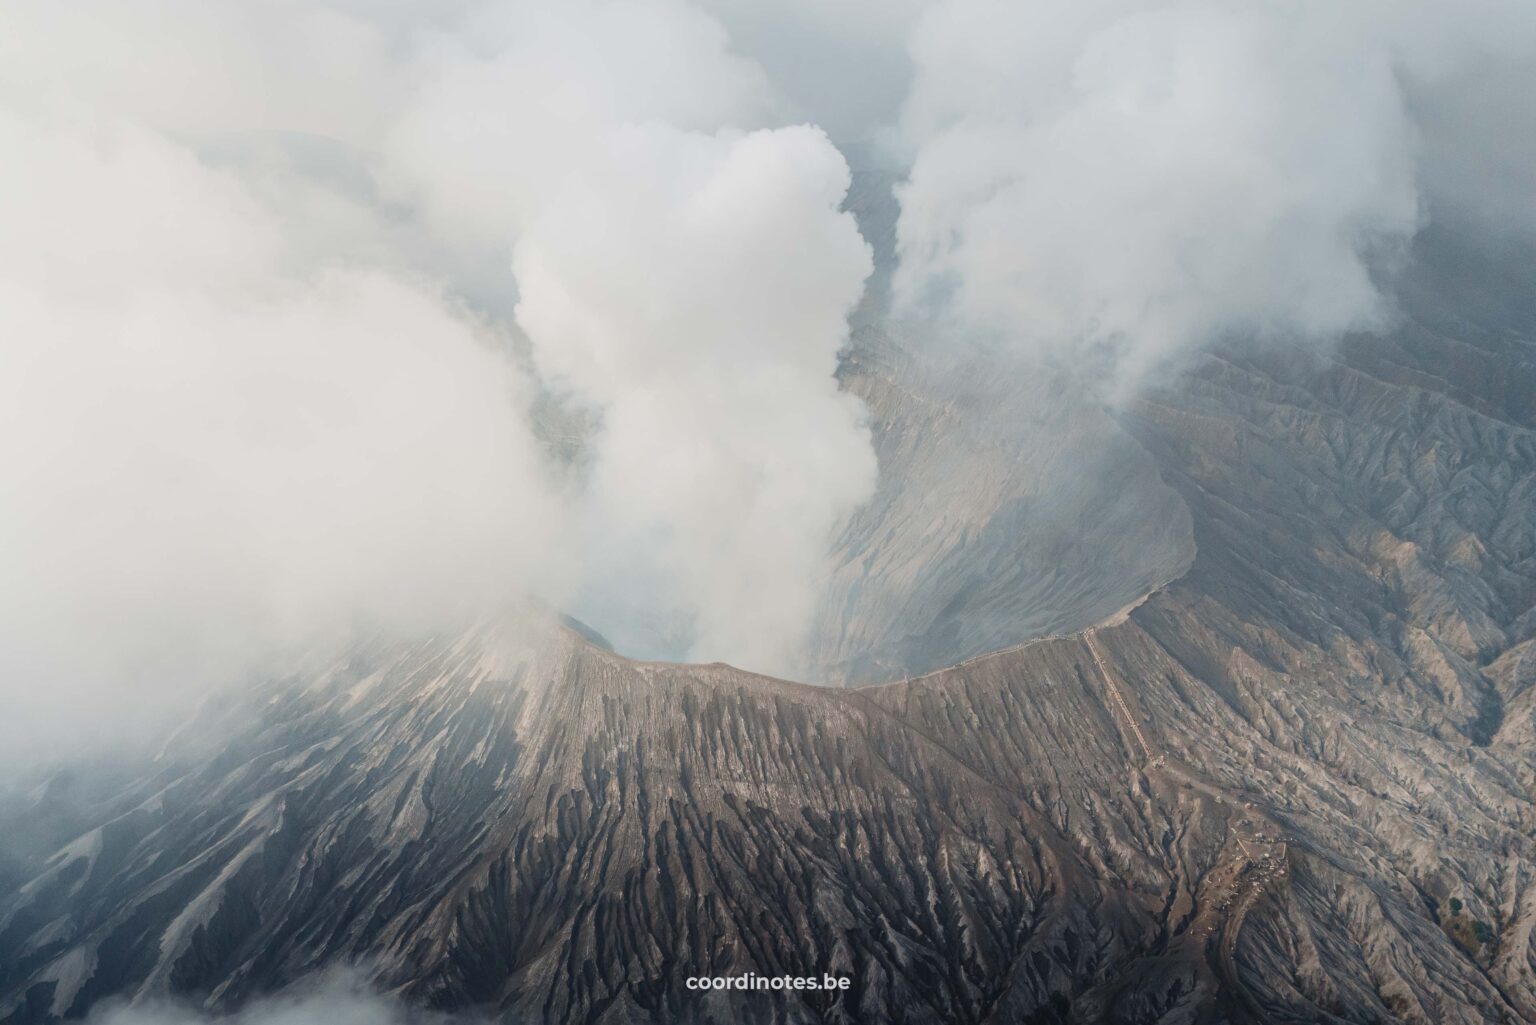 The crater of Mount Bromo